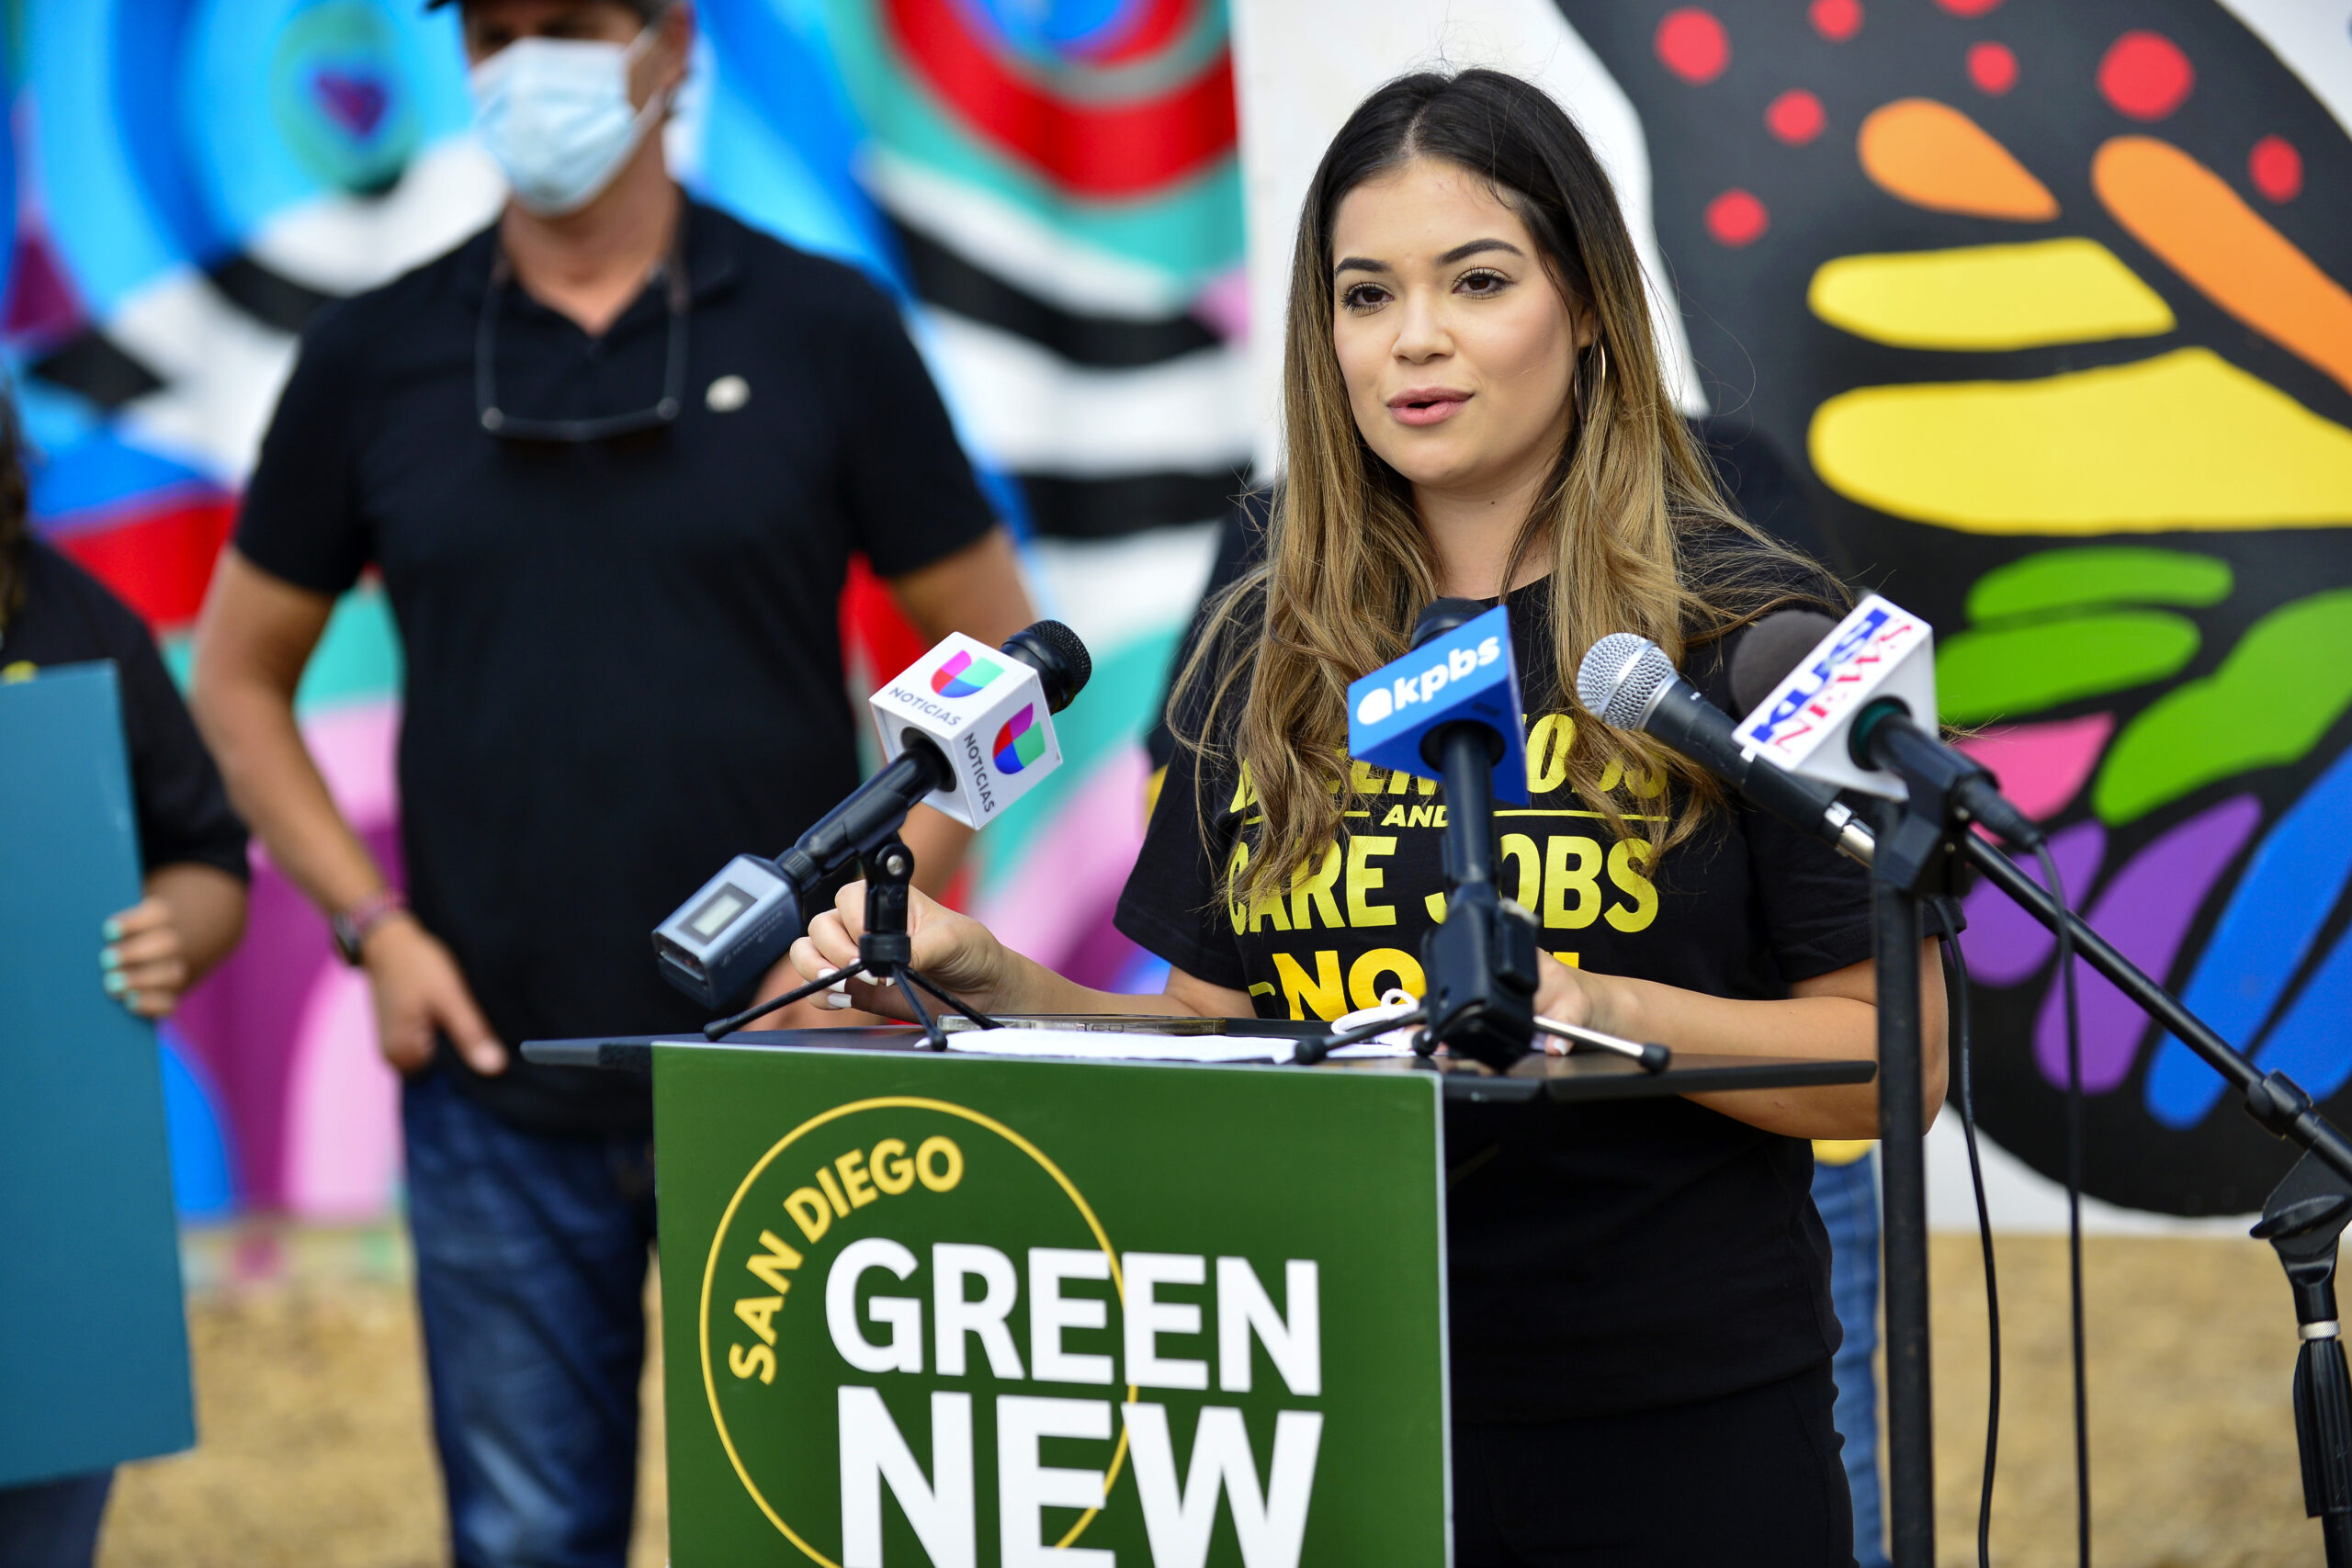 San Diego Green New Deal organizers speak at a public rally for GND demands